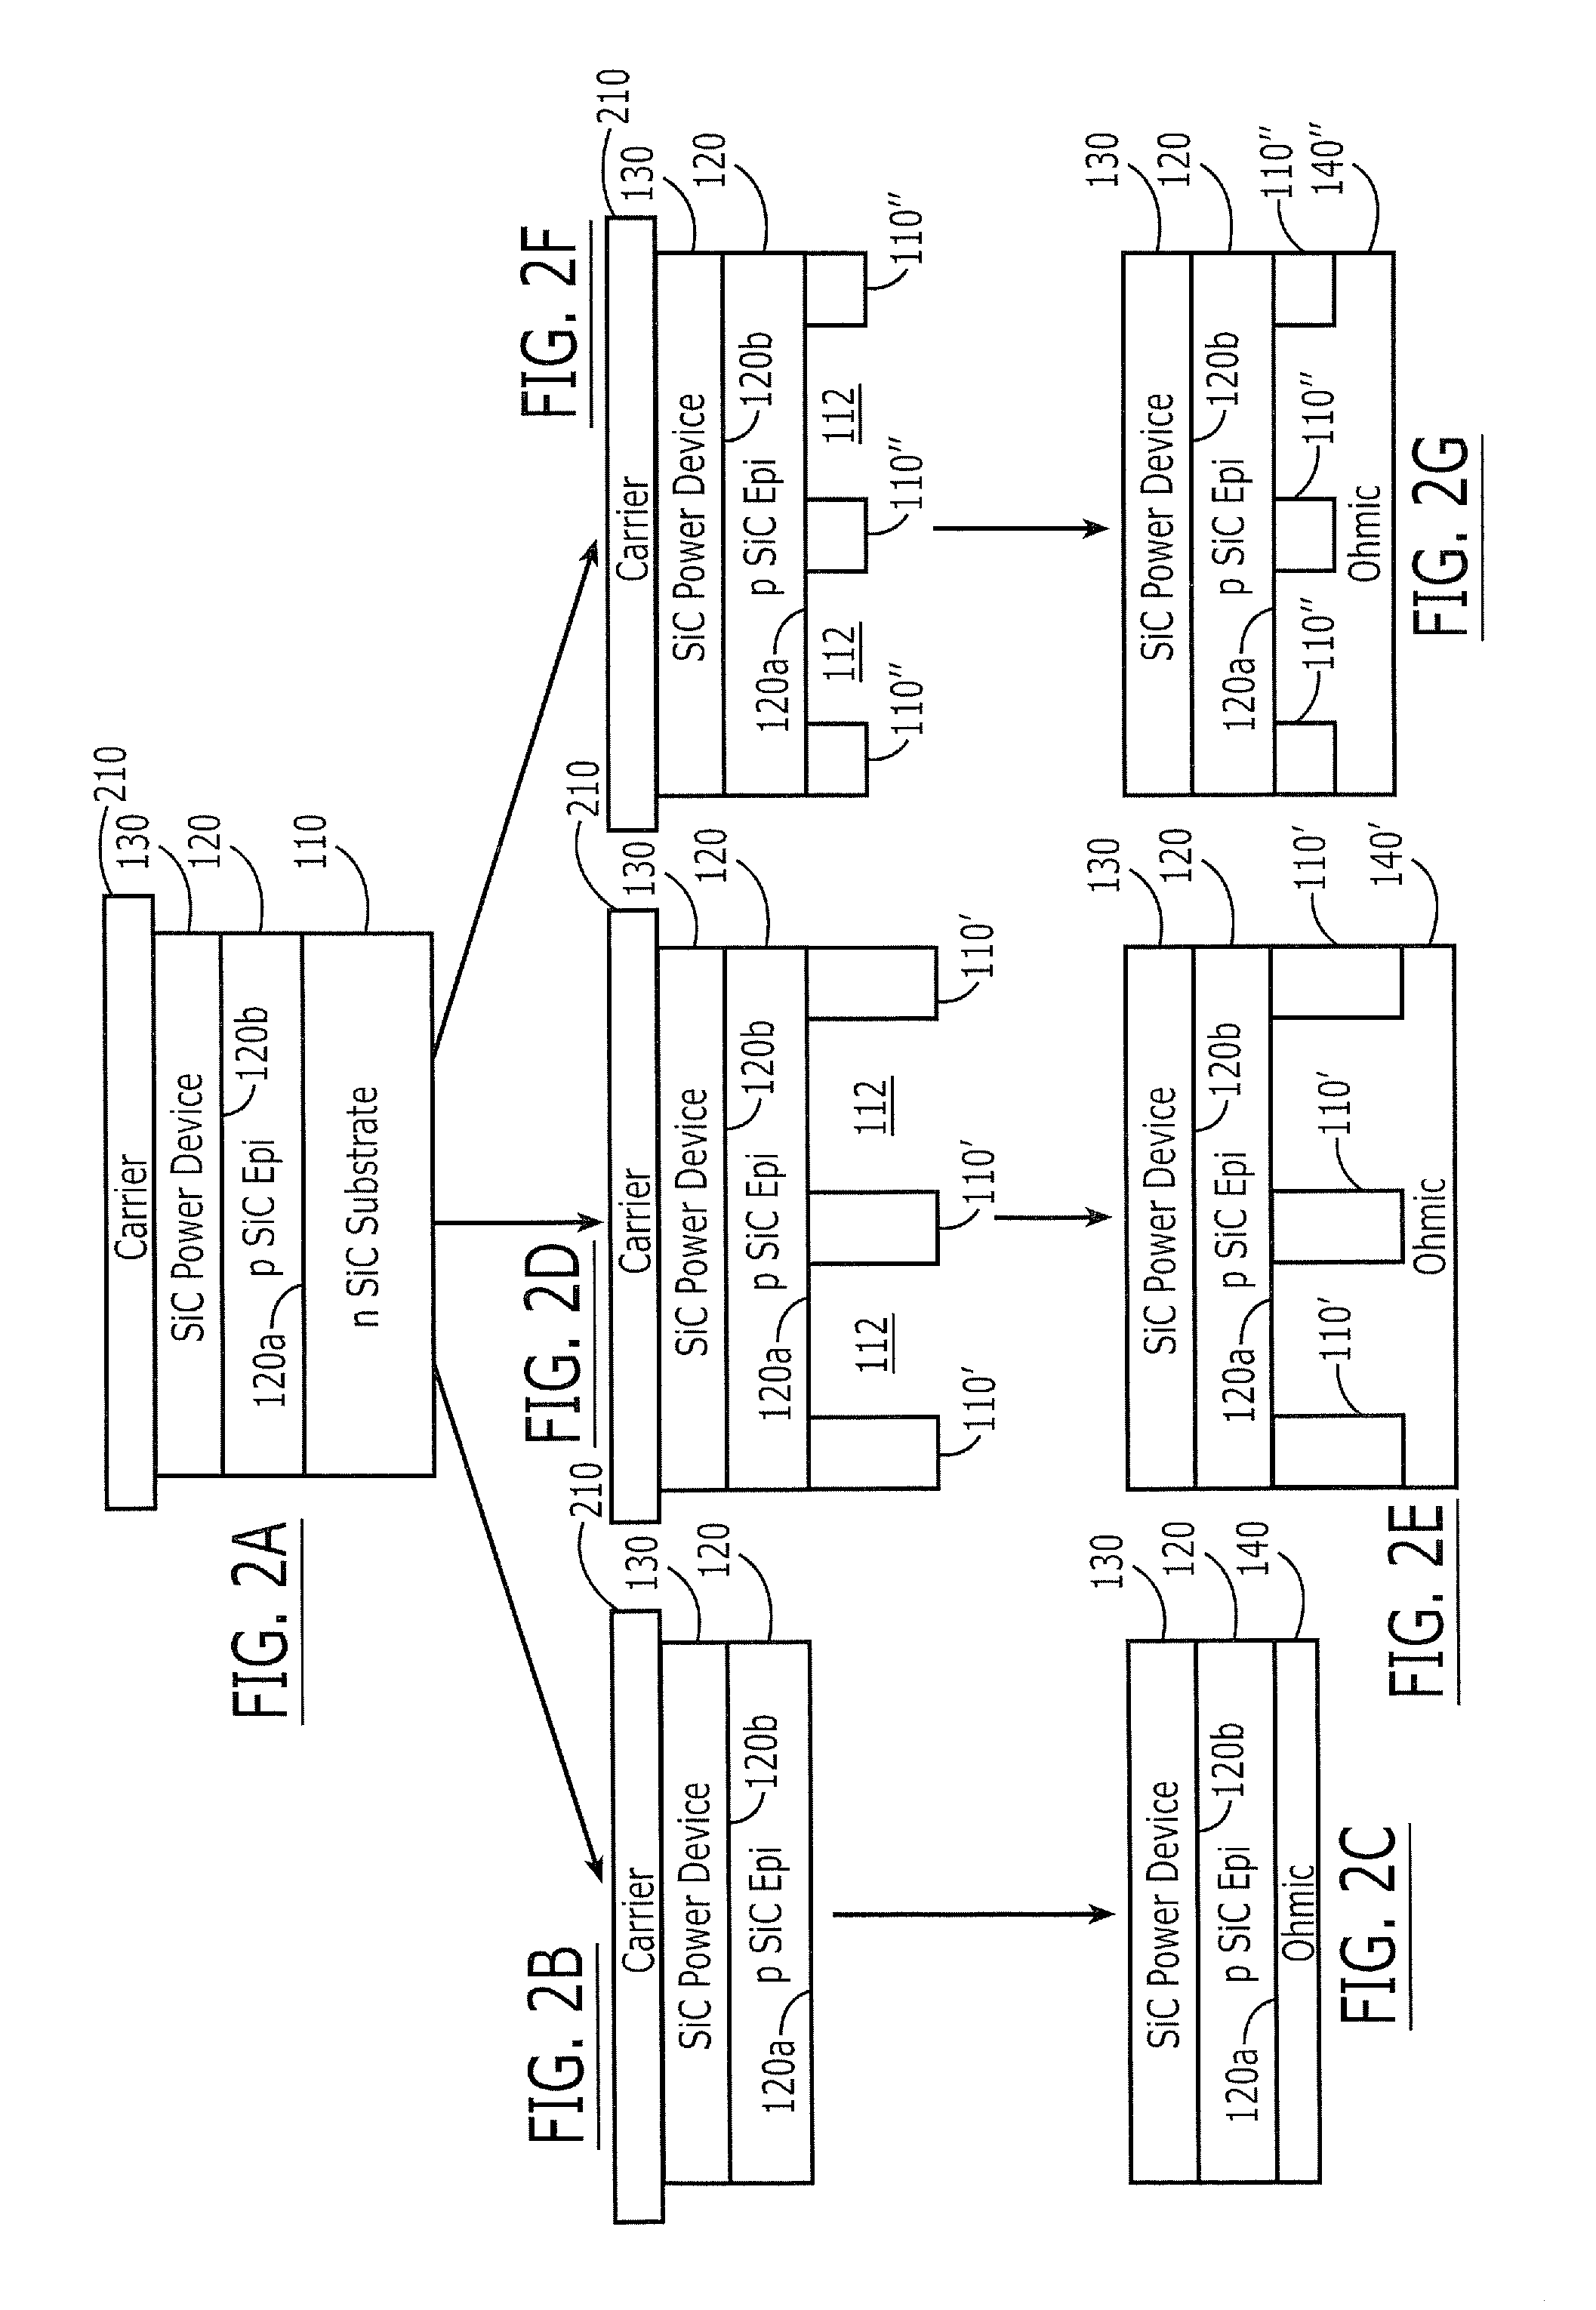 Methods of fabricating silicon carbide power devices by at least partially removing an n-type silicon carbide substrate, and silicon carbide power devices so fabricated